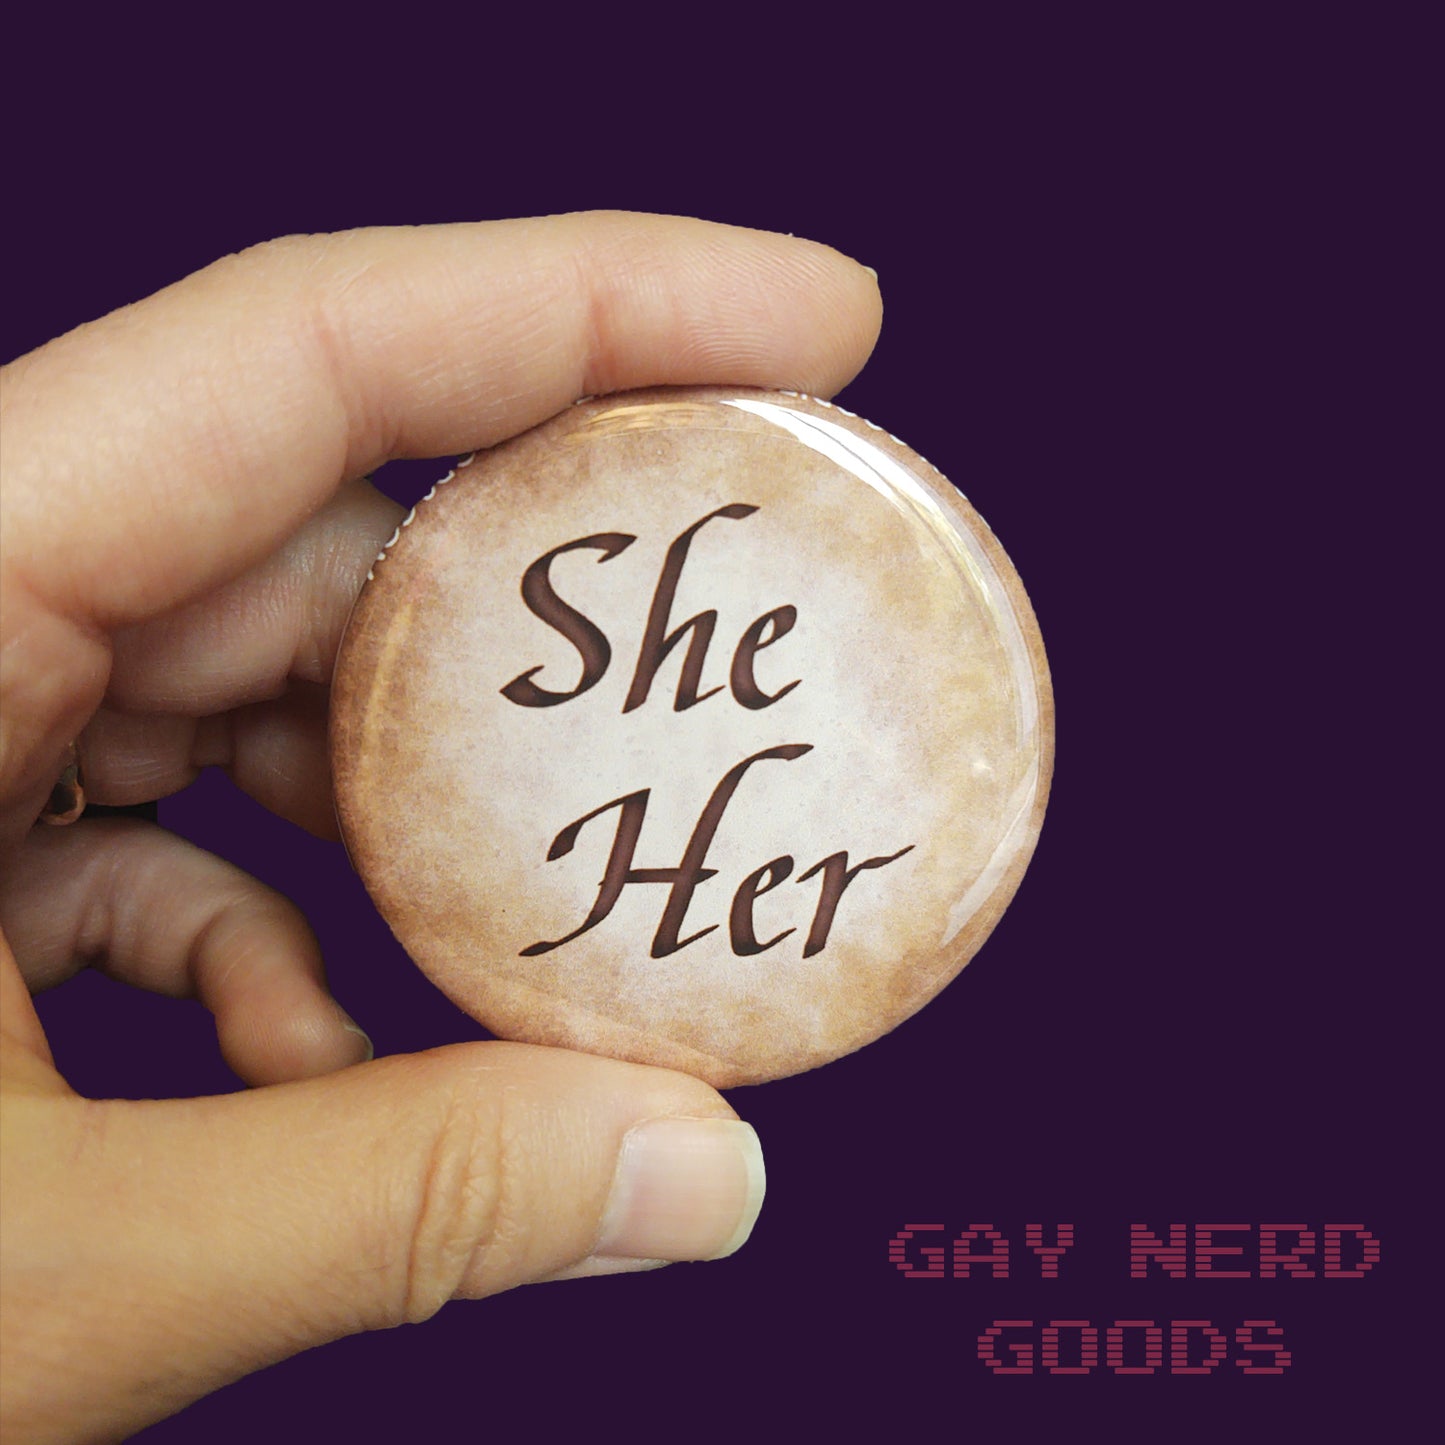 she her large calligraphy pronoun button held in two fingers on a dark purple background